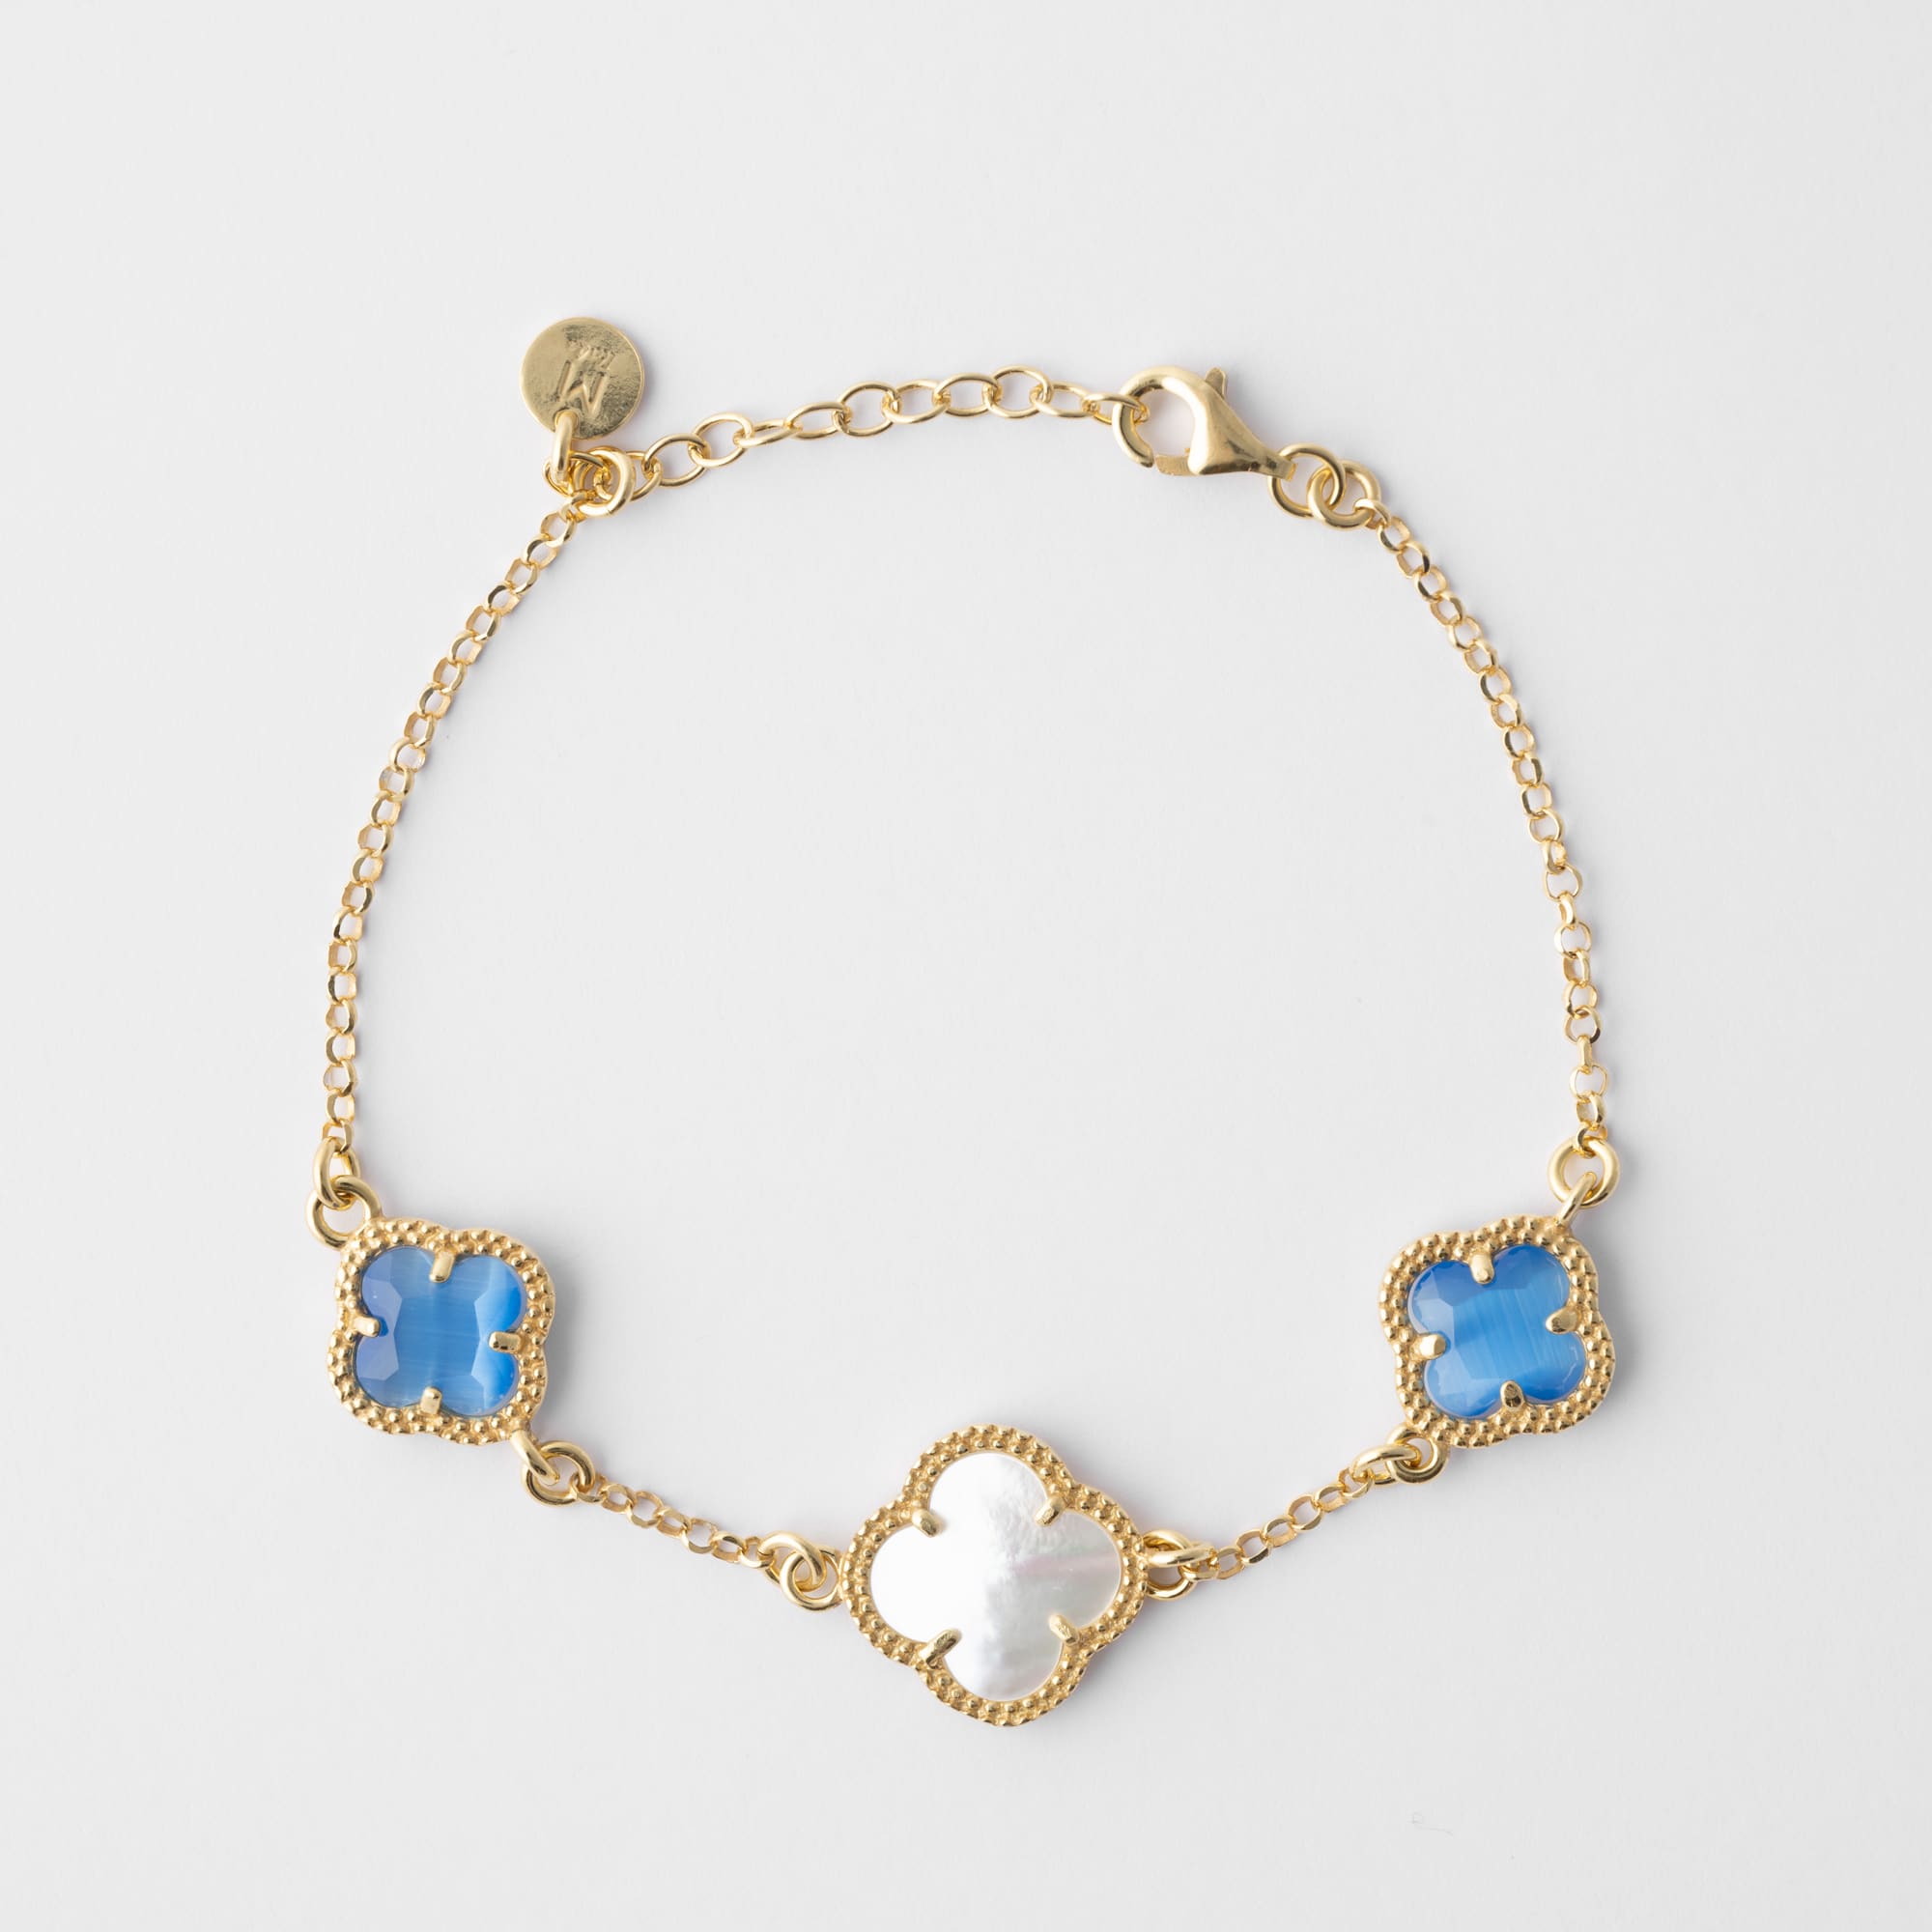 Clover bracelet with blu quartz and mother of pearl